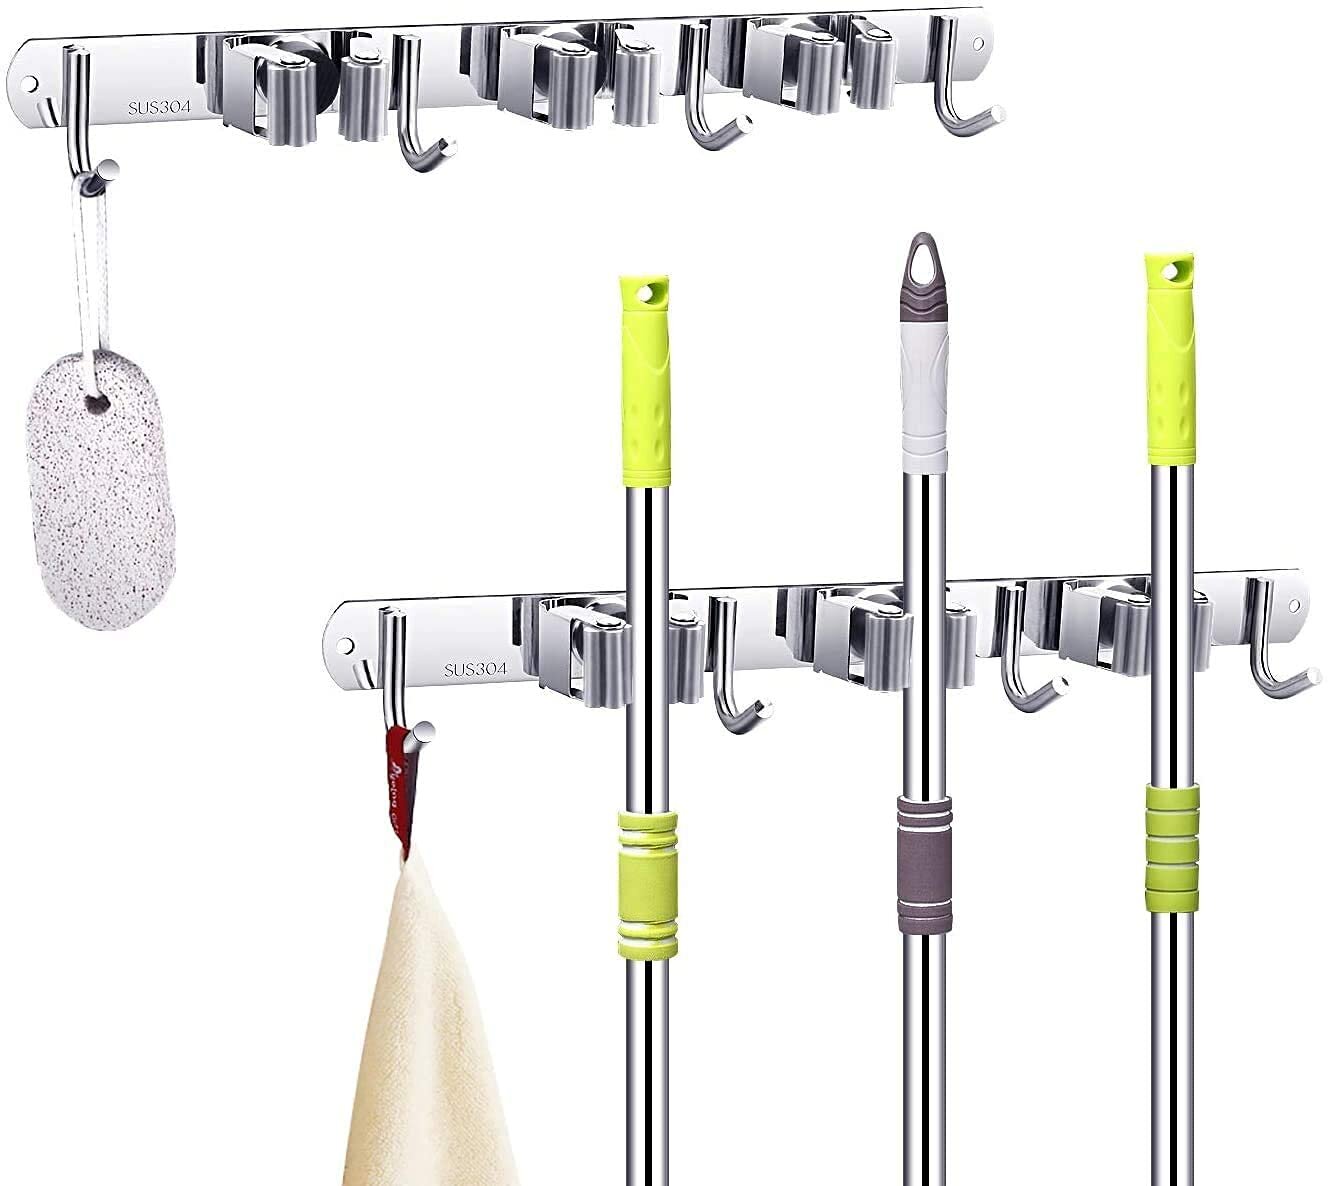 SUS304 Stainless Steel Mop Broom Holder Organizer Heavy Duty Broom Mop Handle Holder for Kitchen Garage 3 Positions Hooks Multifunctional S-Type Wall Mounted Cleaning Tools Organizer